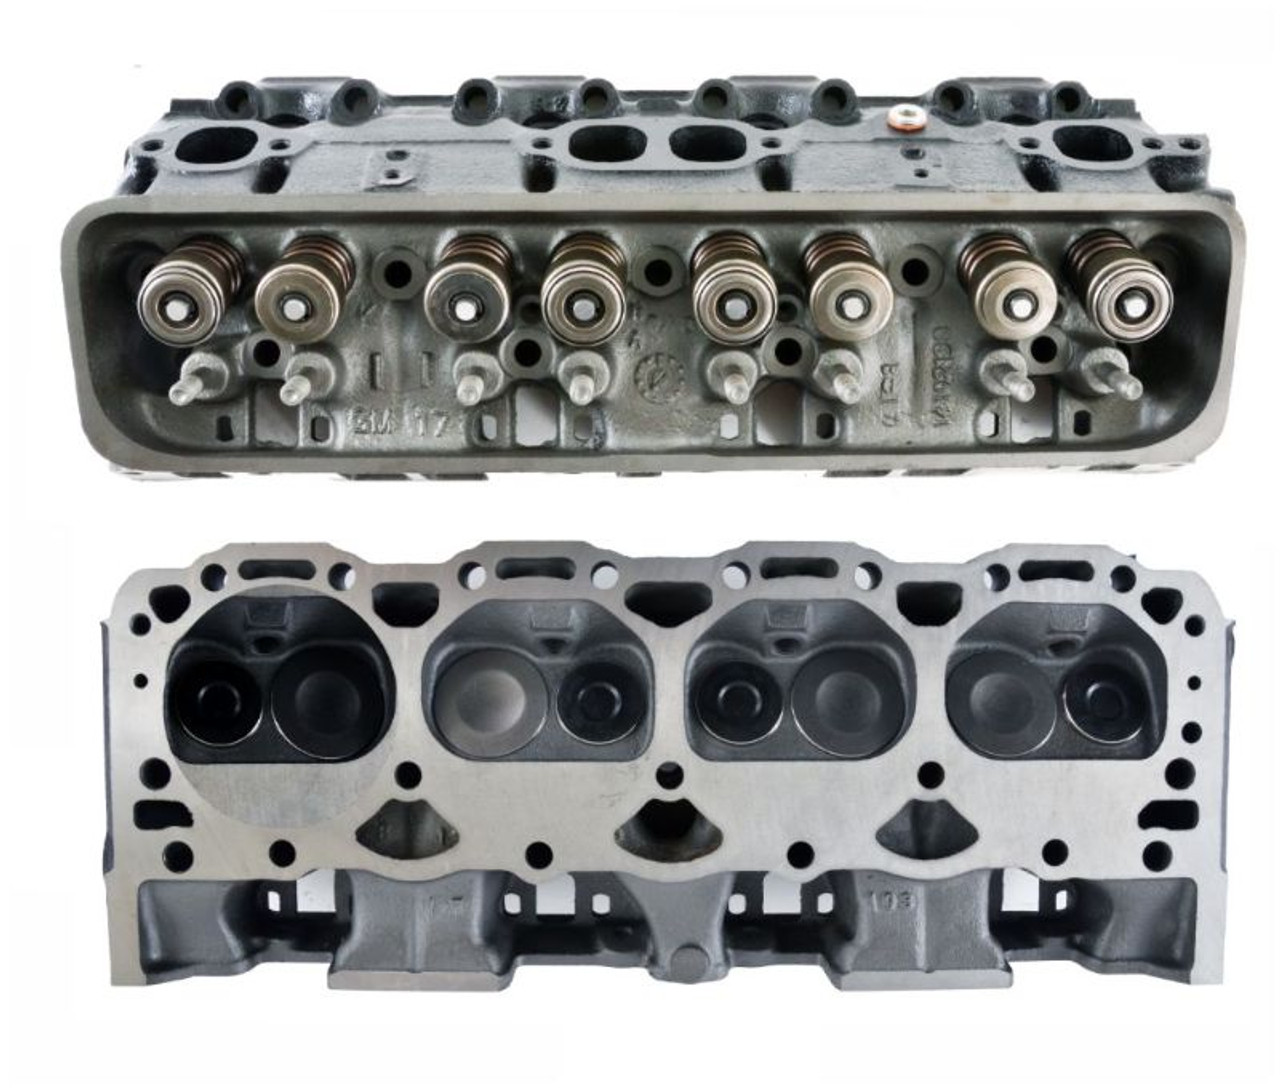 1987 Chevrolet R20 5.7L Engine Cylinder Head Assembly CH1064R -10